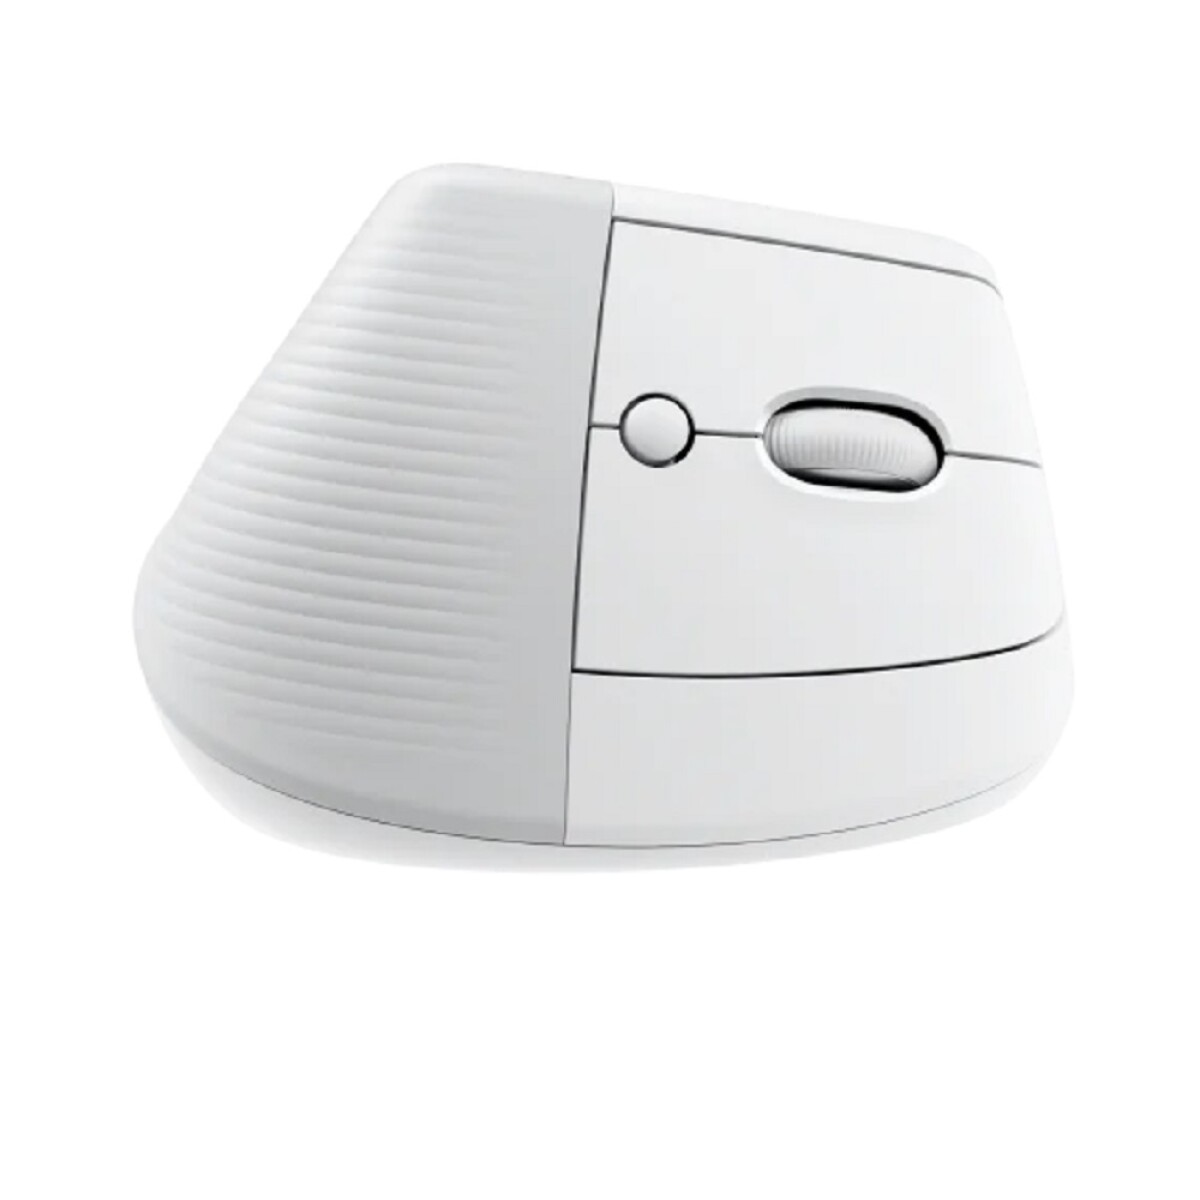 LOGITECH 910-006469 MOUSE LIFT VERTICAL OFF WHITE INAL+BT - 6078 